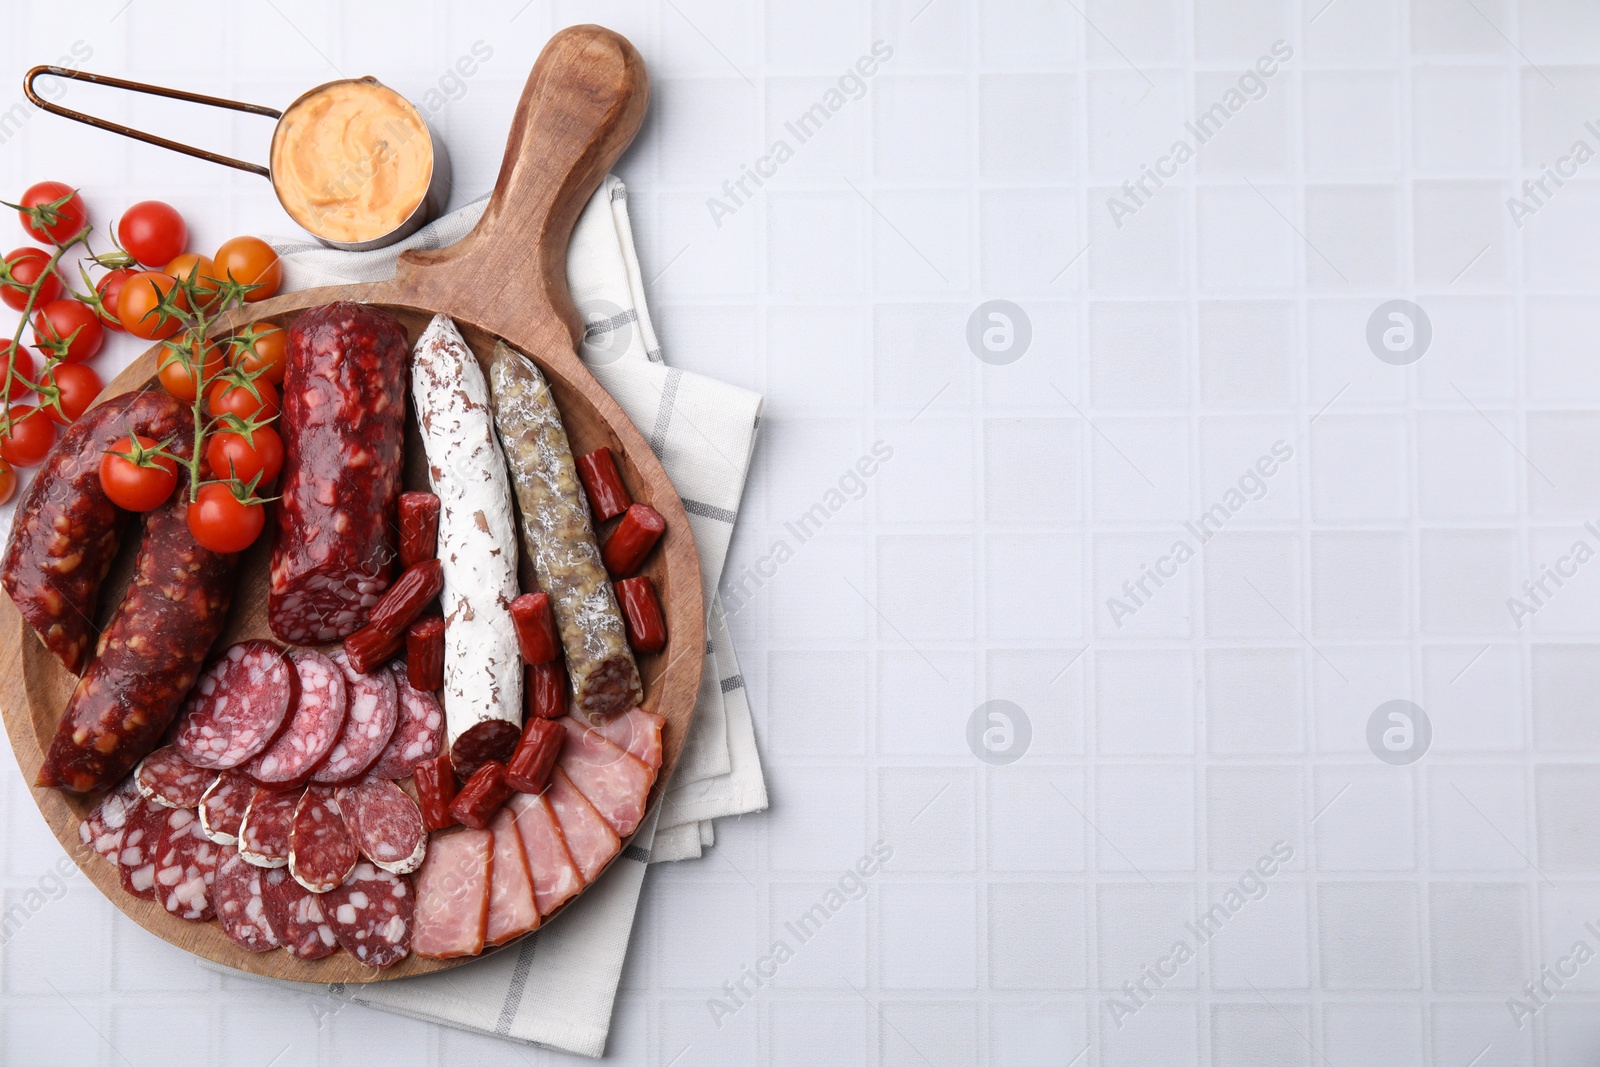 Photo of Different types of delicious sausages, sauce and tomatoes on white tiled table, flat lay. Space for text